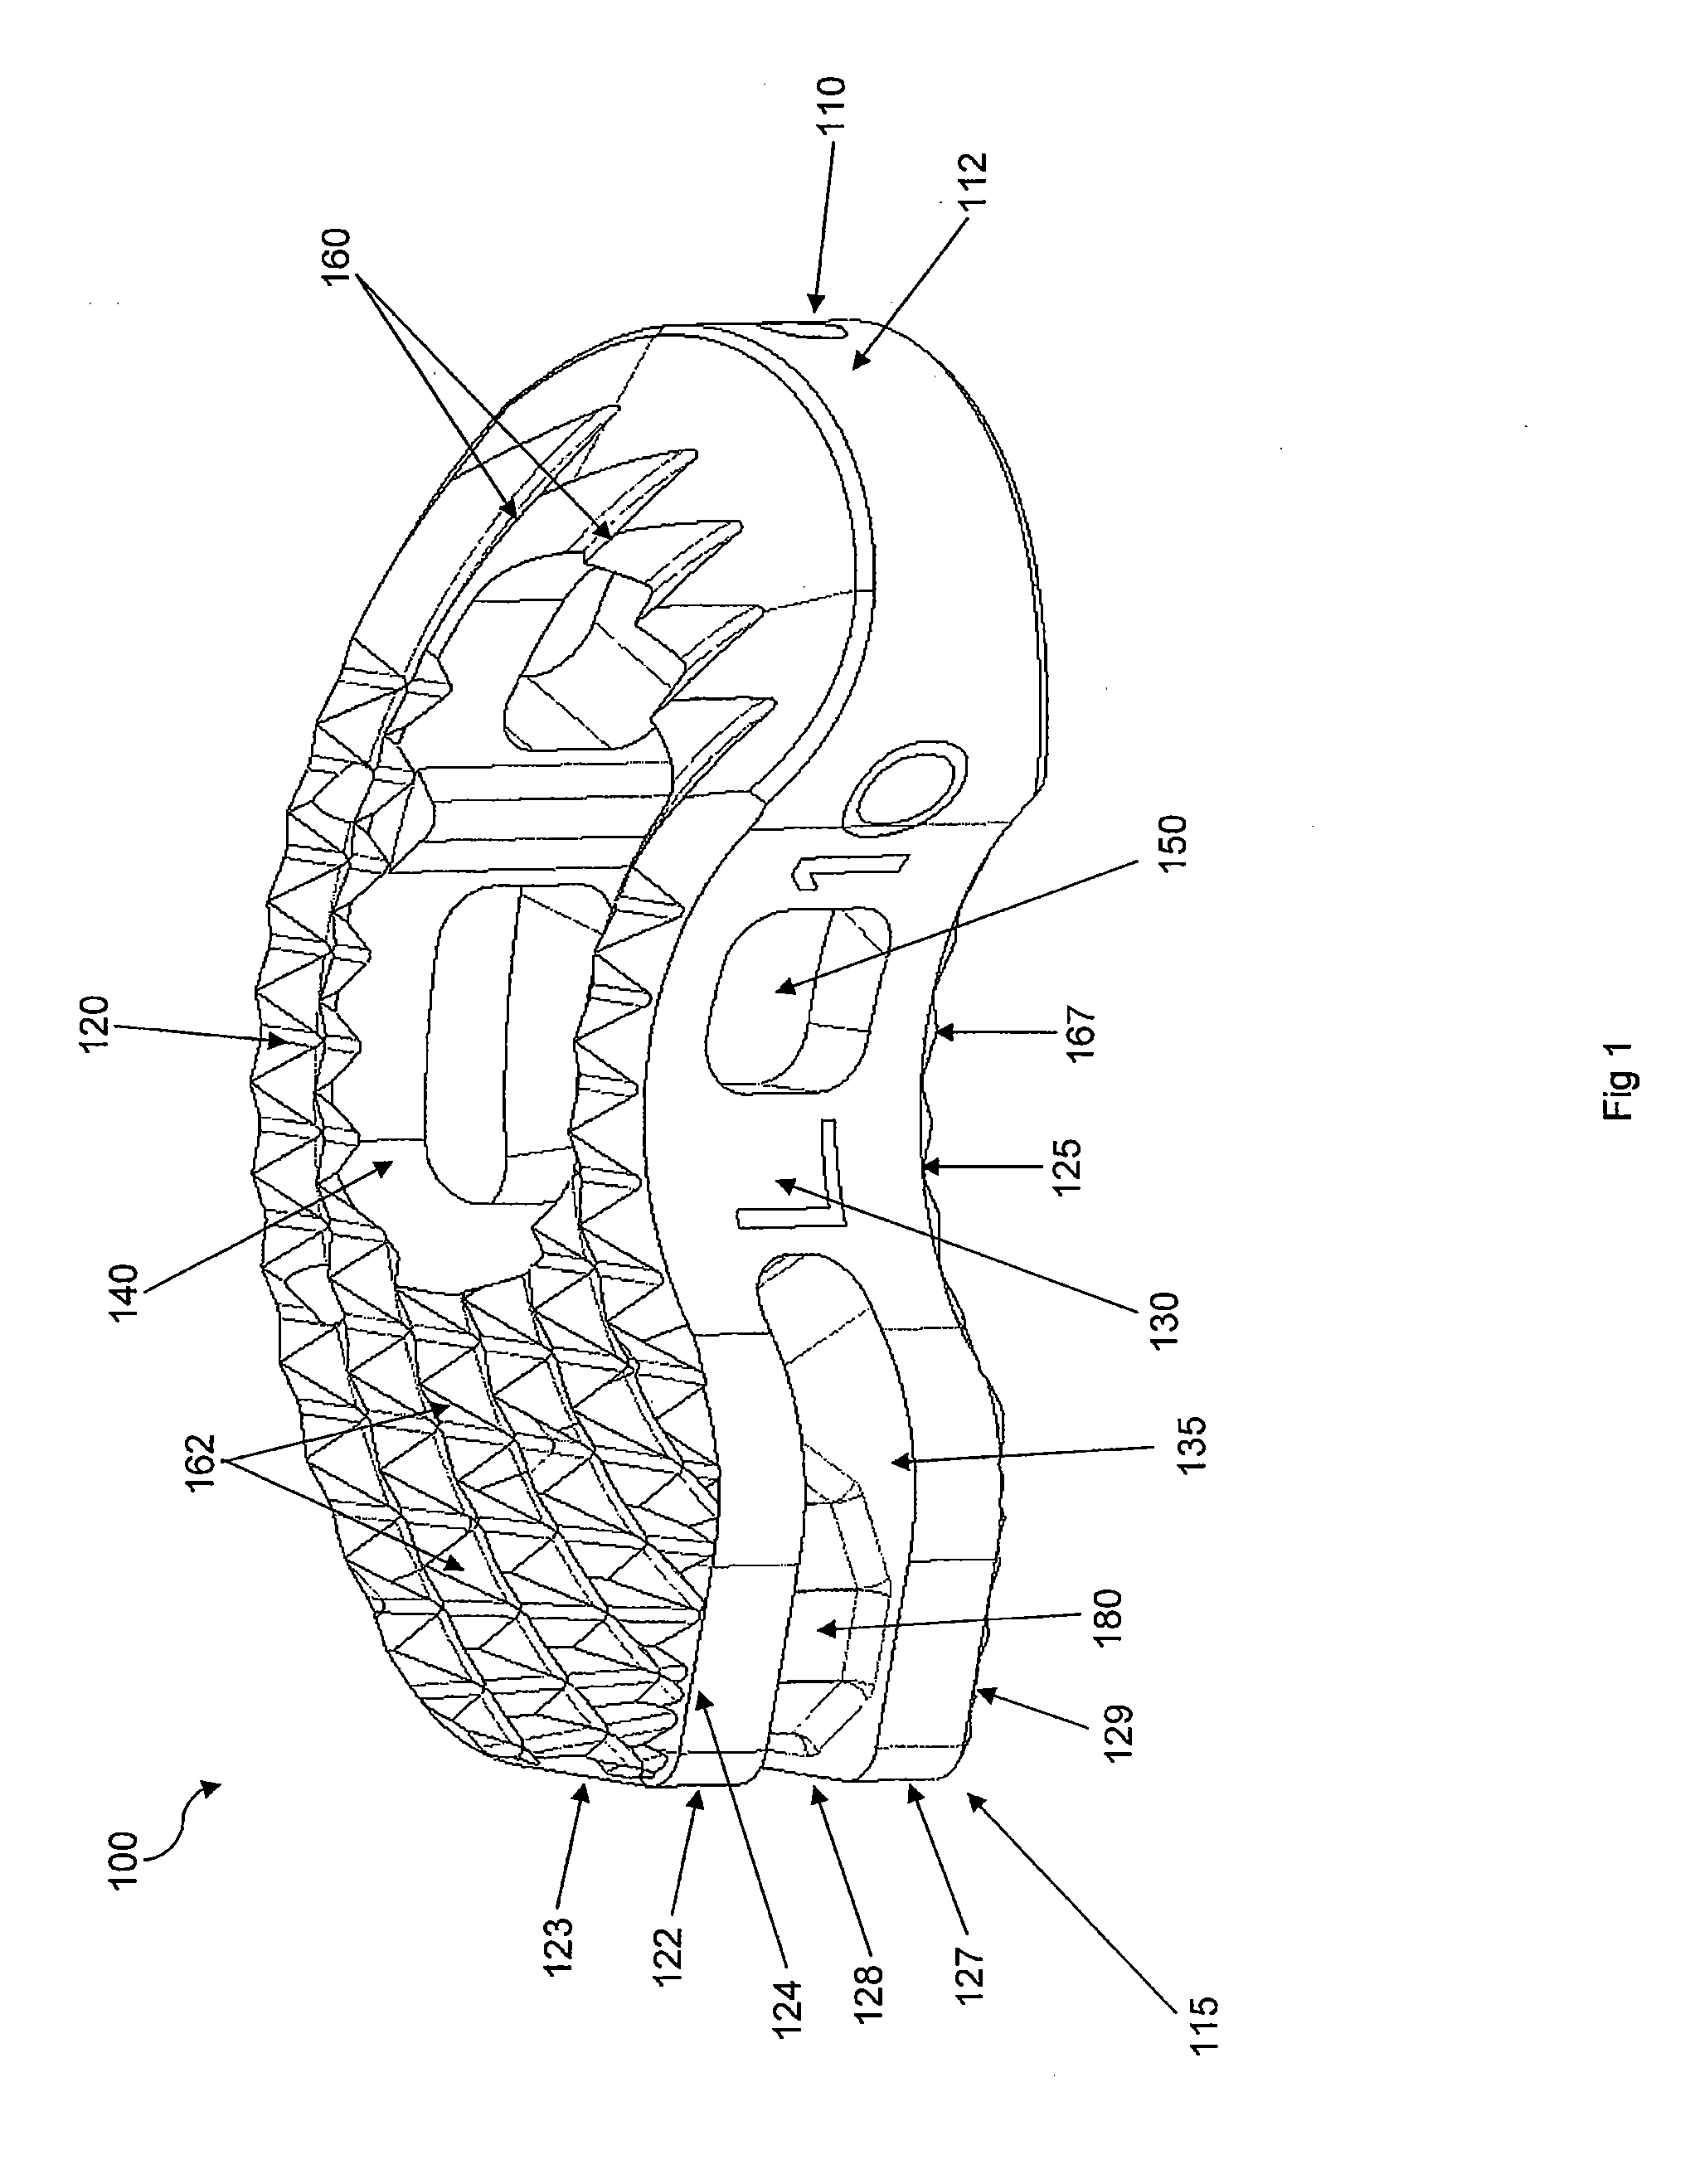 Self-Pivoting Spinal Implant and Associated Instrumentation